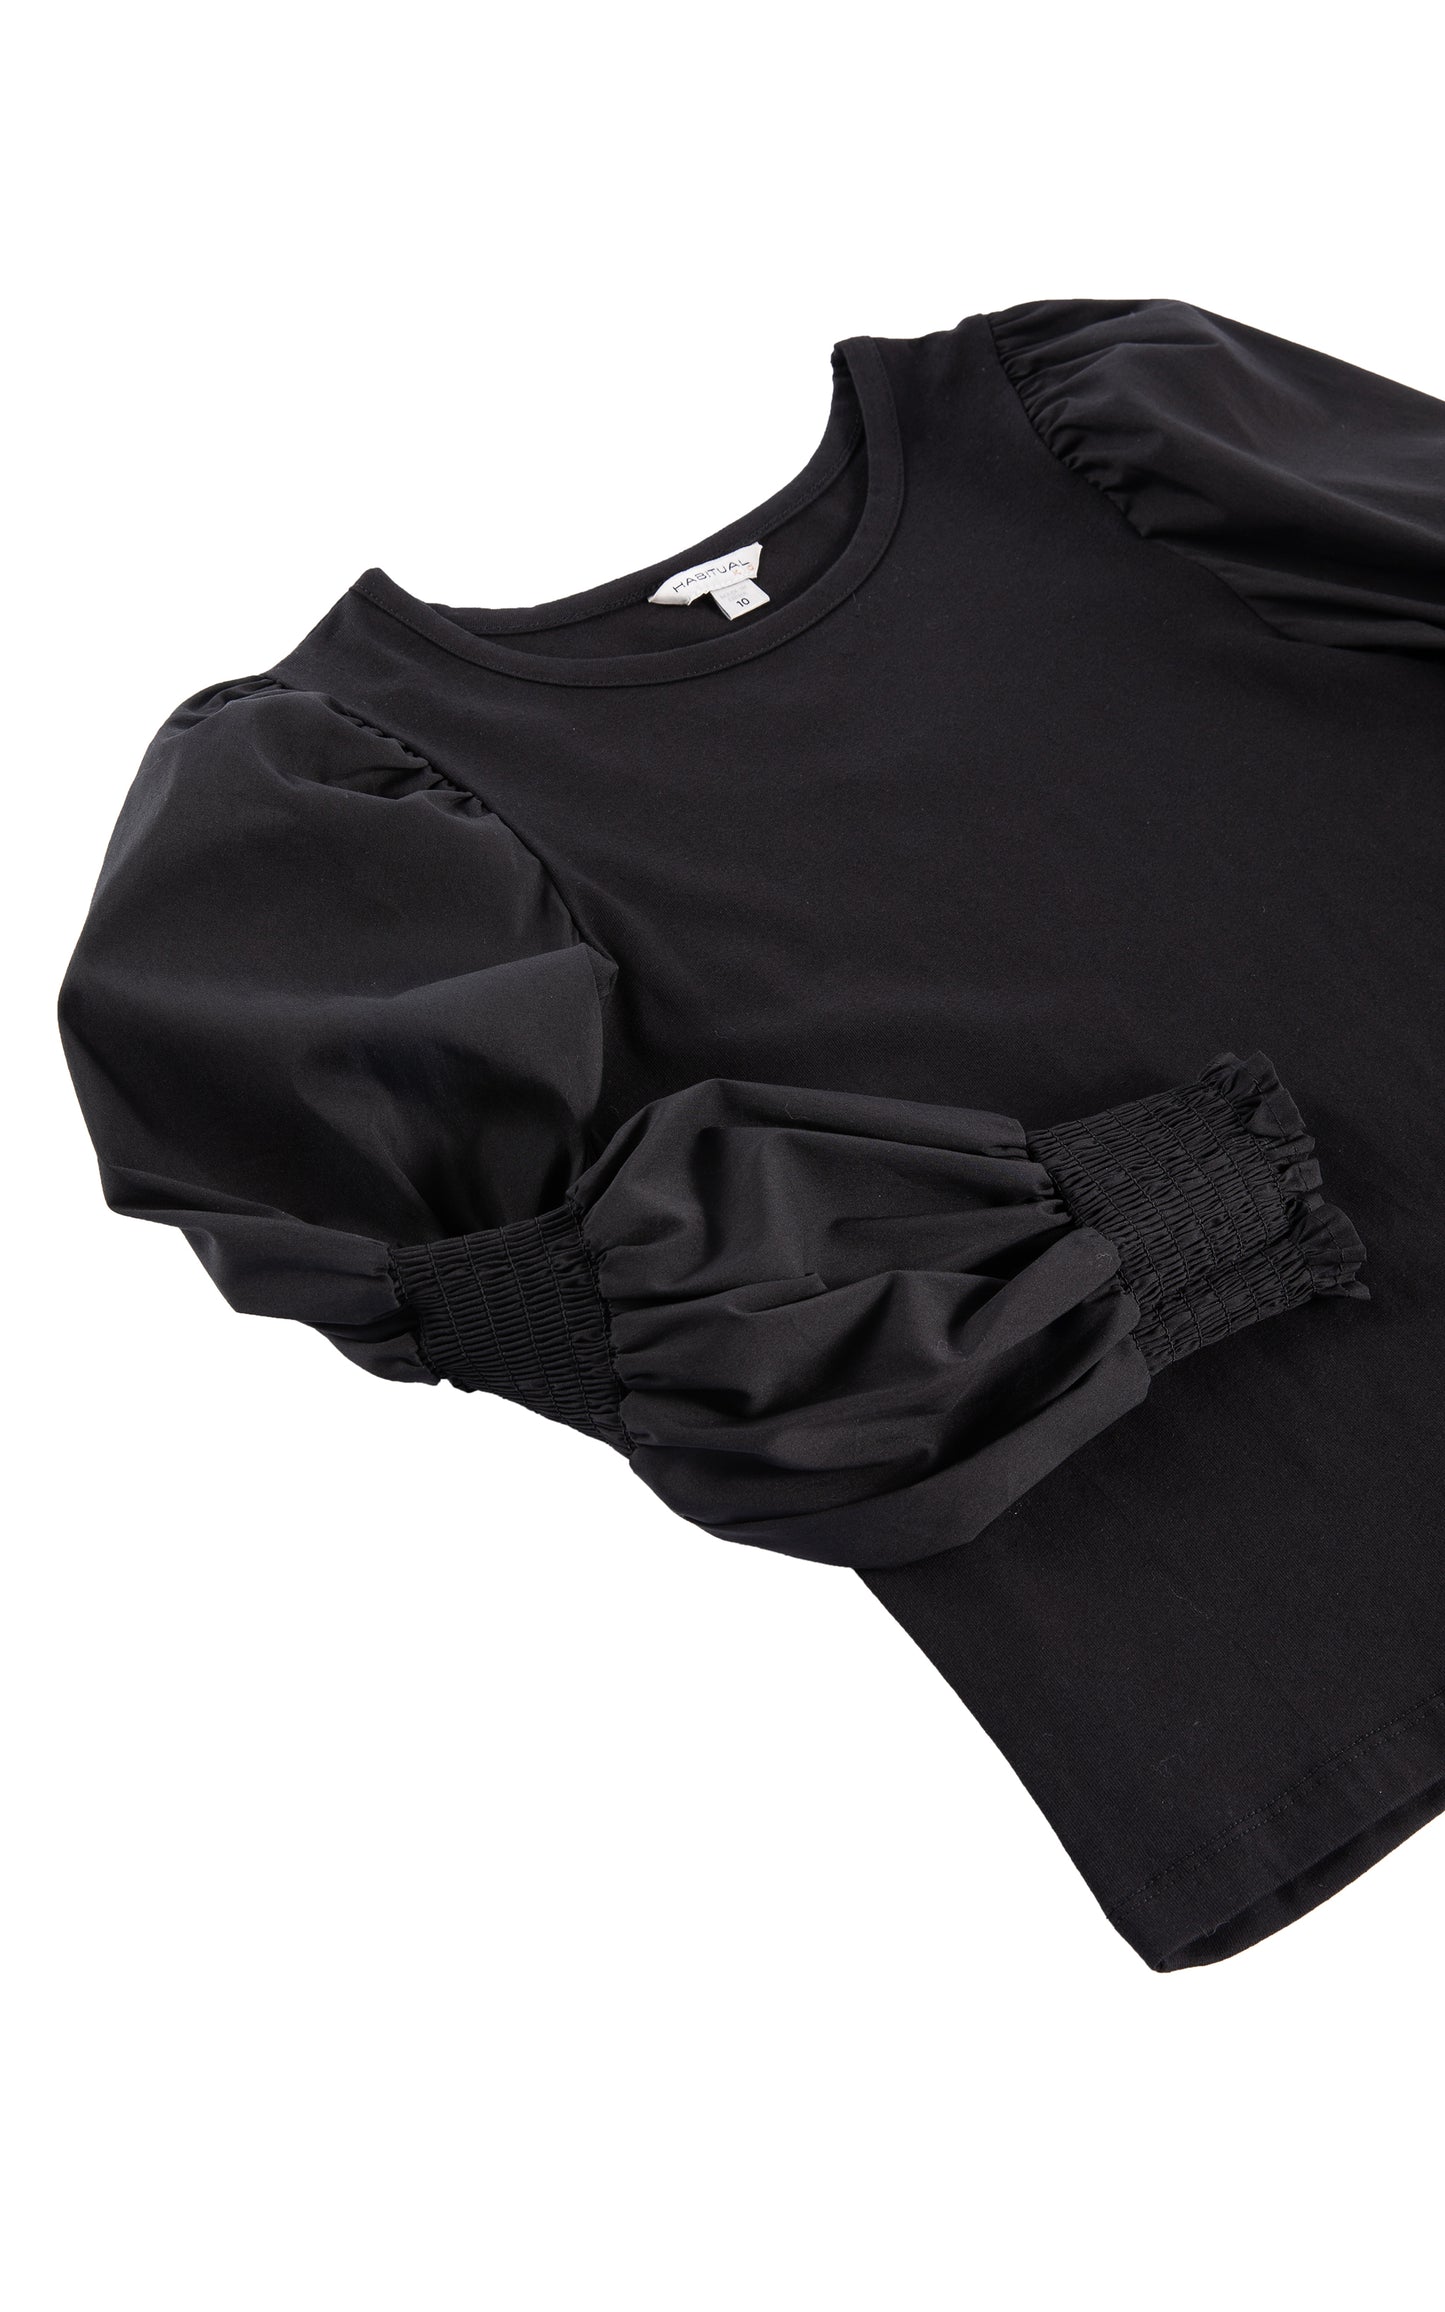 CLOSE UP OF BLACK LONG-SLEEVE TOP WITH SMOCKING ALONG THE SLEEVES